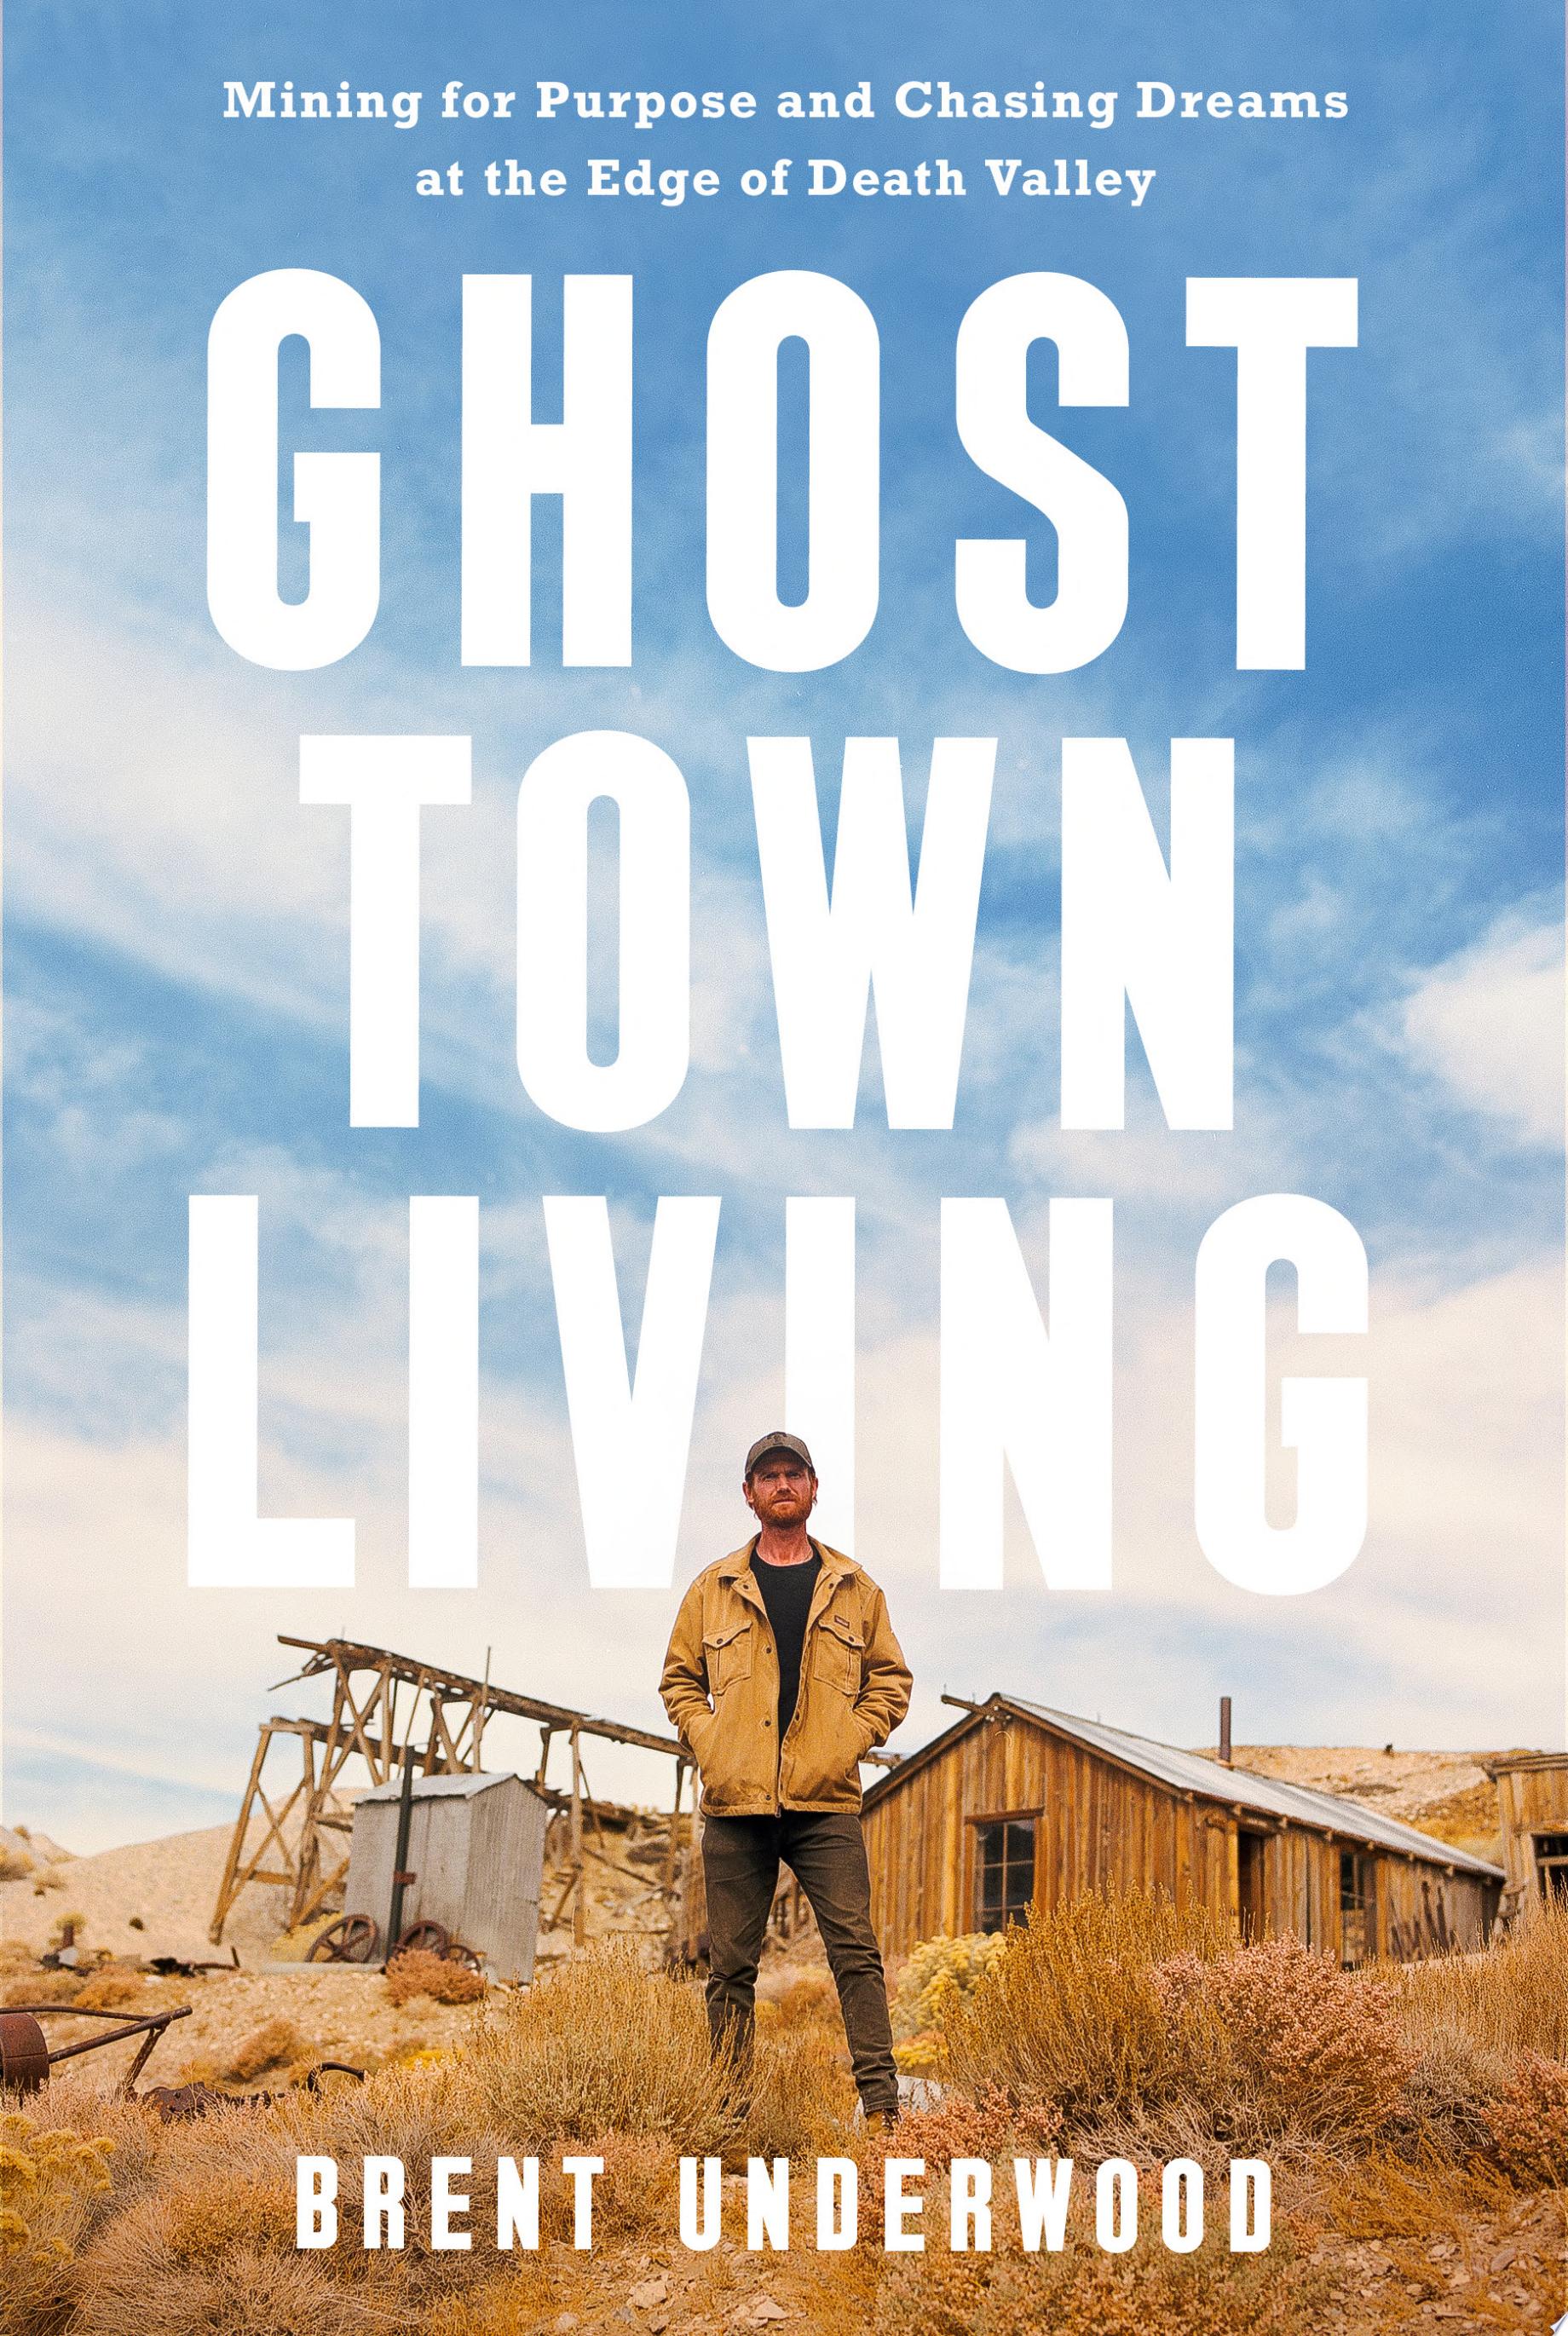 Image for "Ghost Town Living"